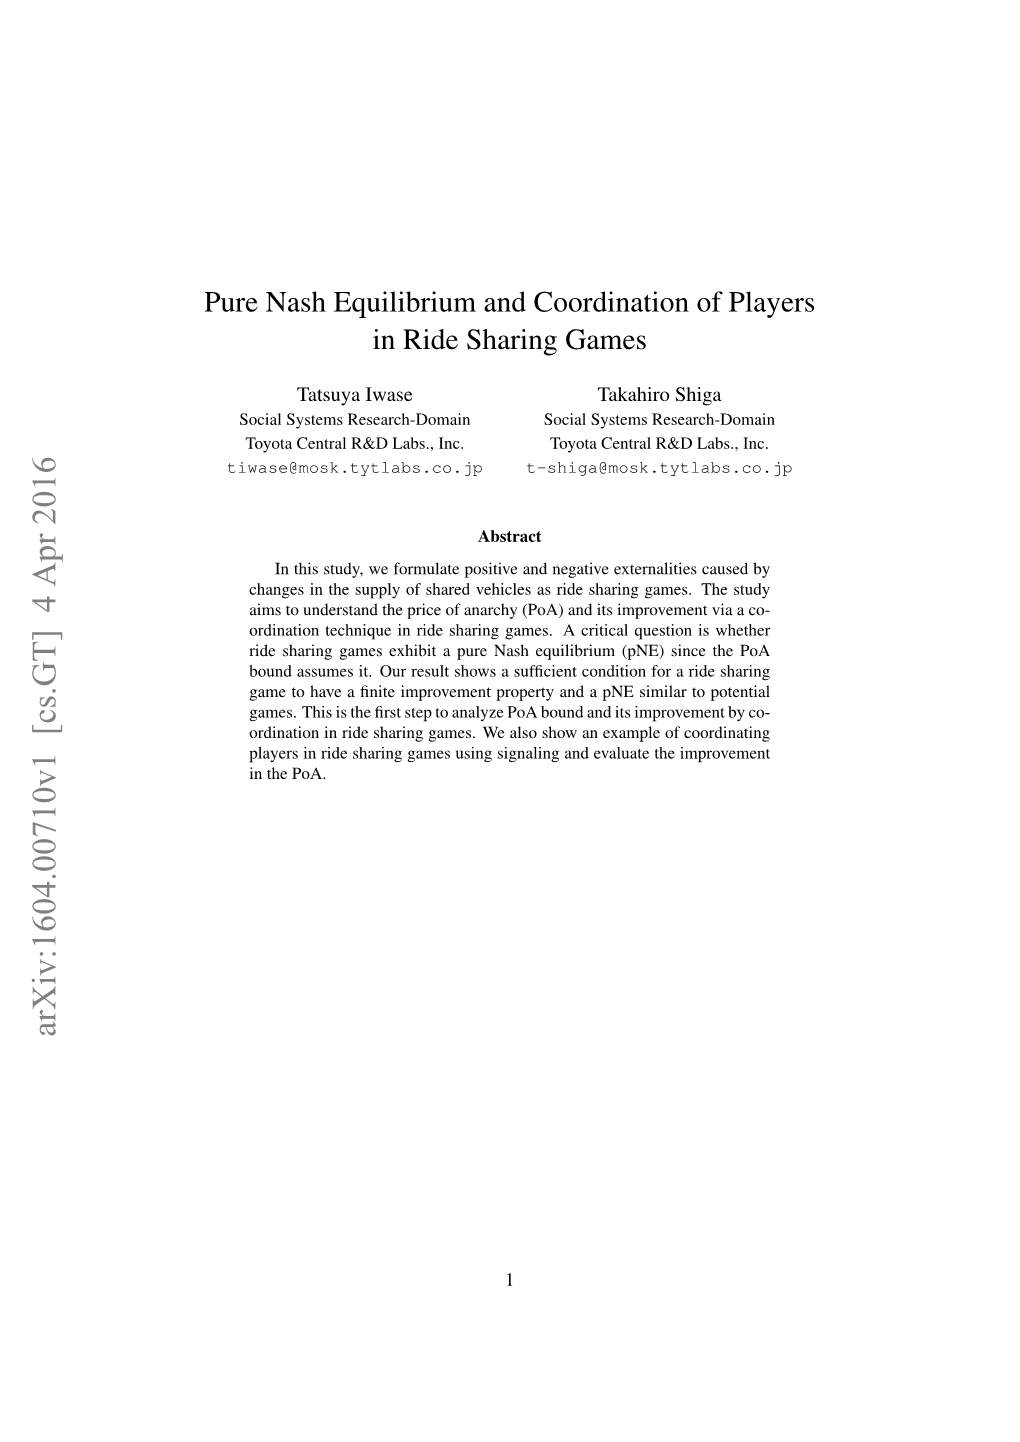 Pure Nash Equilibrium and Coordination of Players in Ride Sharing Games